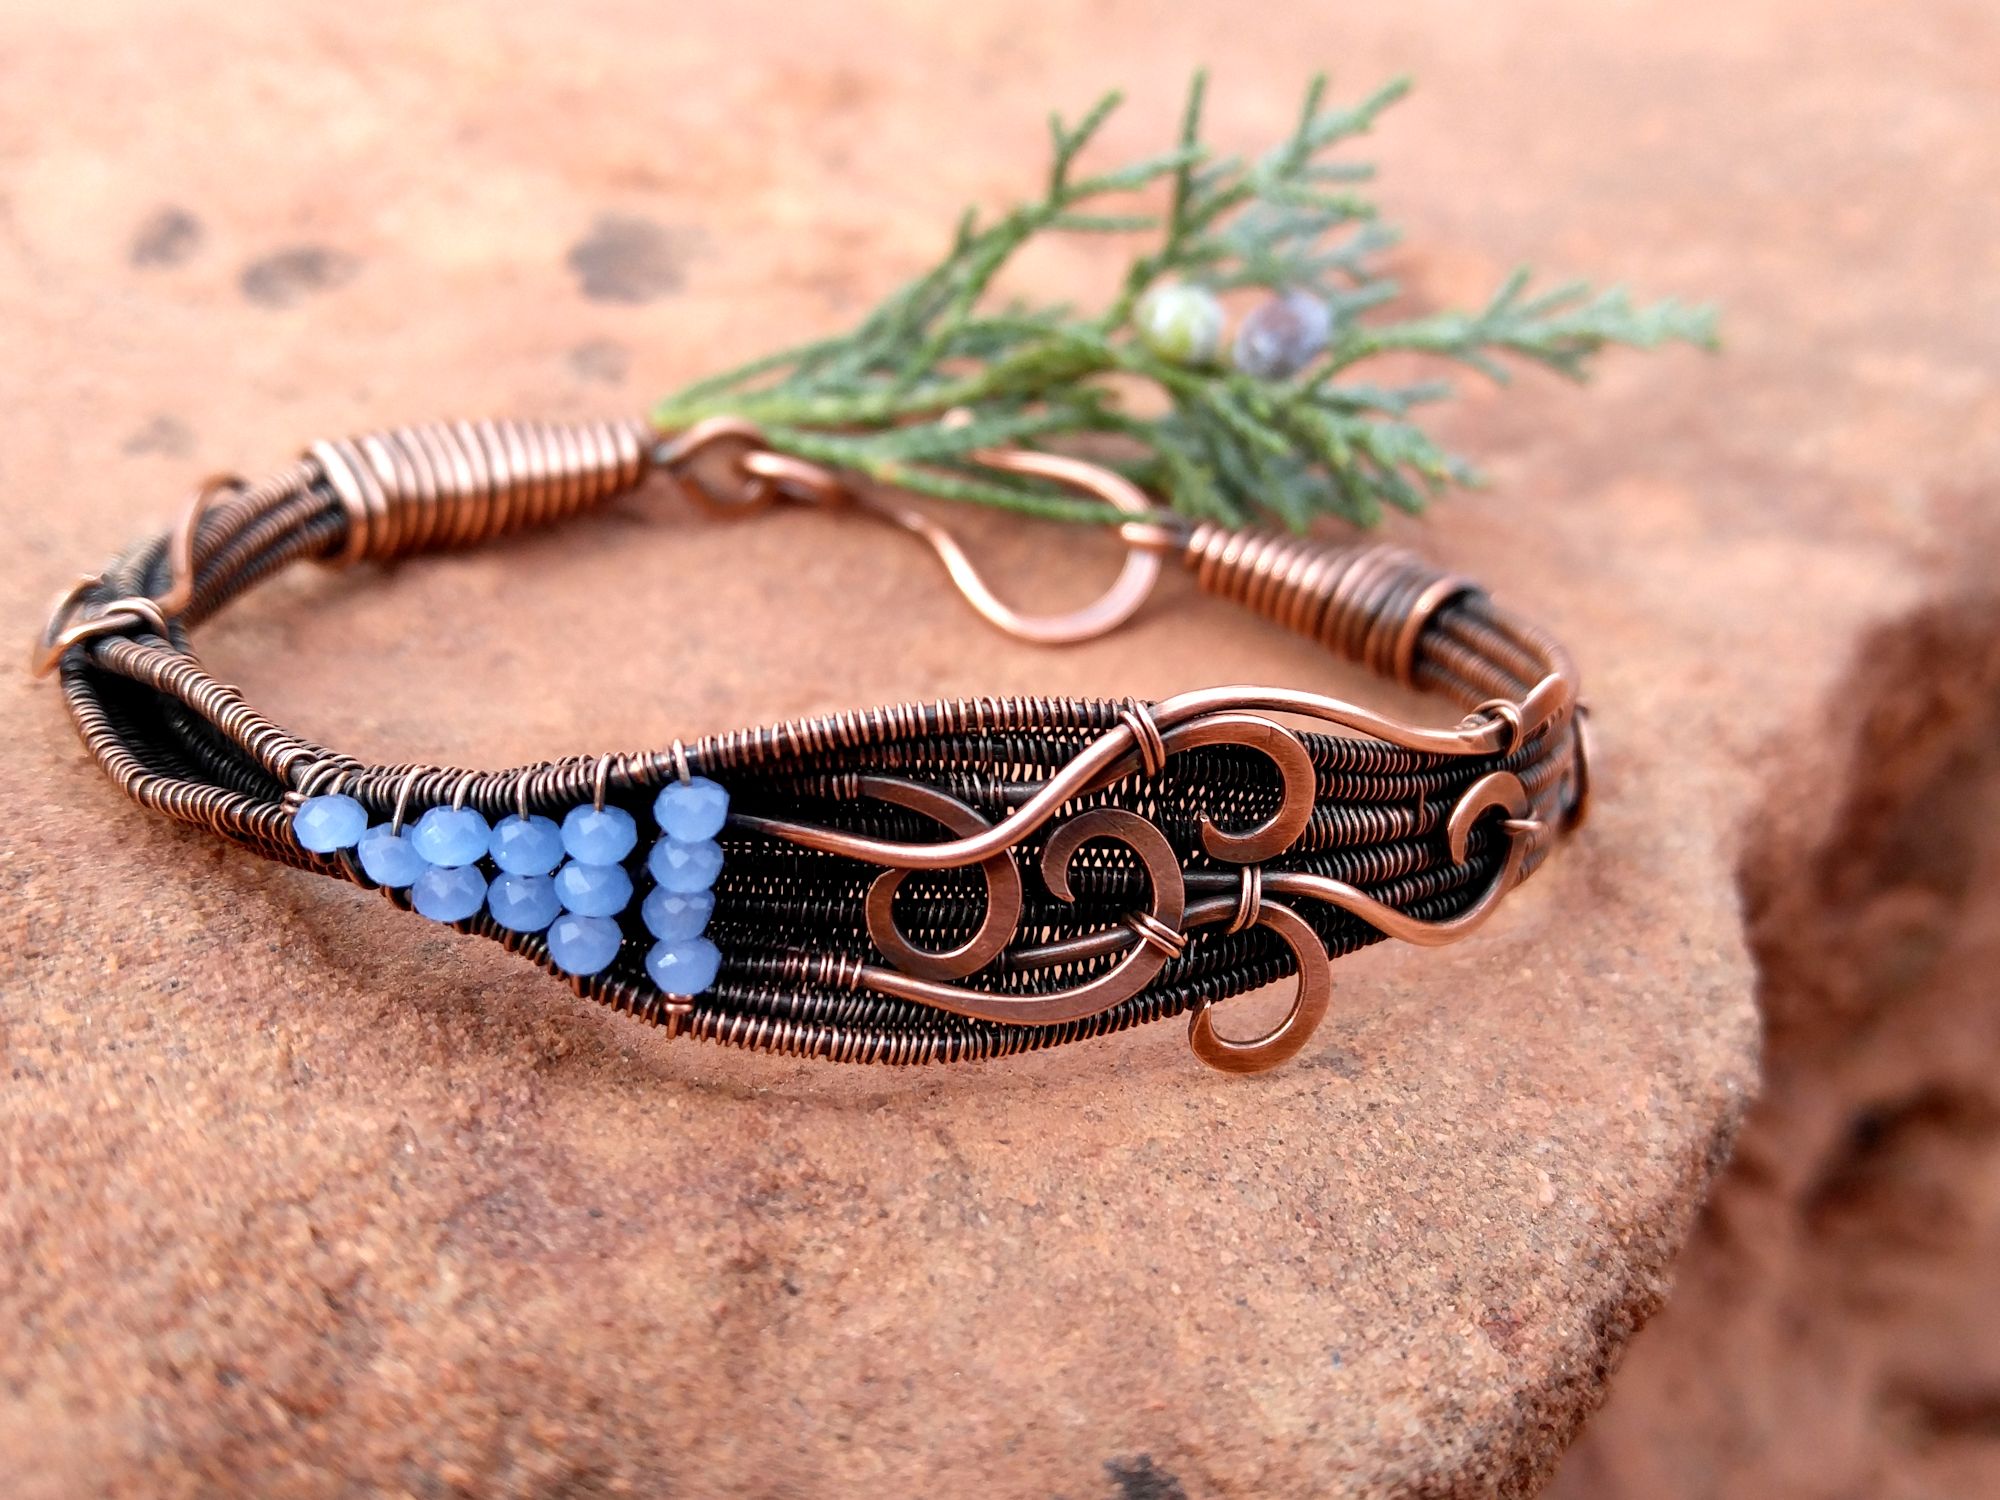 Handcrafted copper wirework bracelet. Design by Sarah Thompson. Crafted by Wendi Reamy